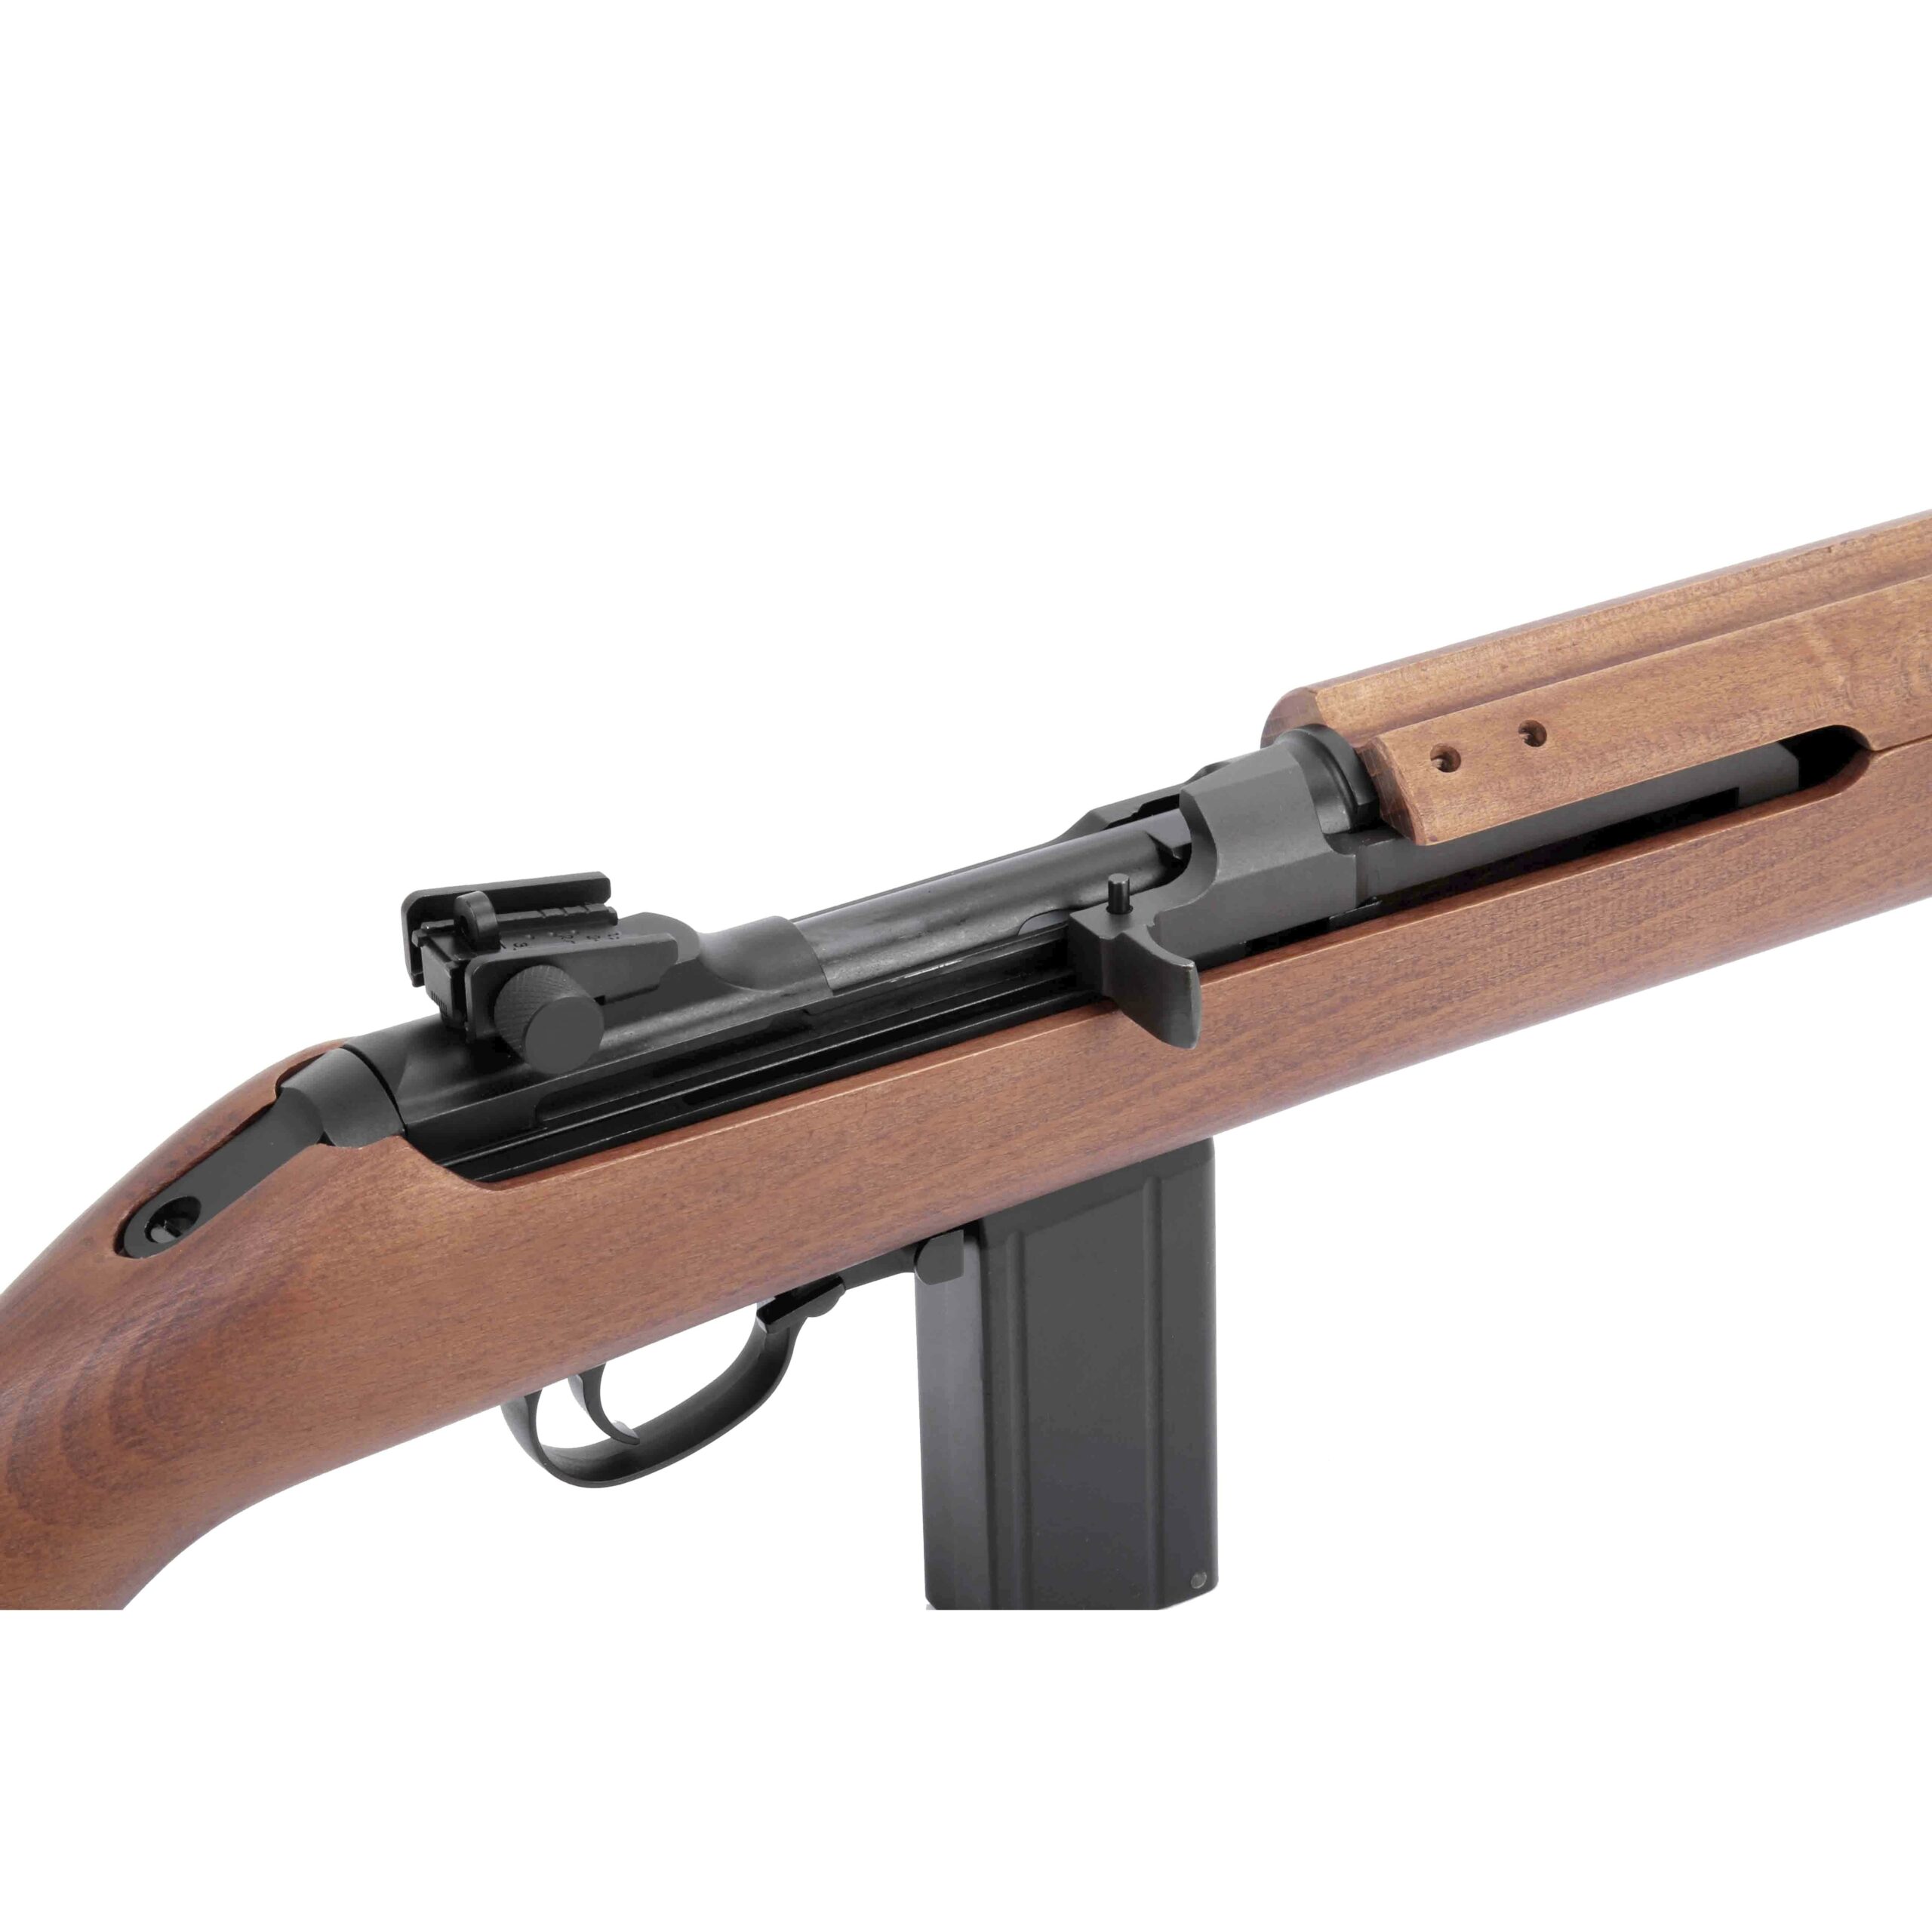 King Arms M1A1 Carbine (CO2)